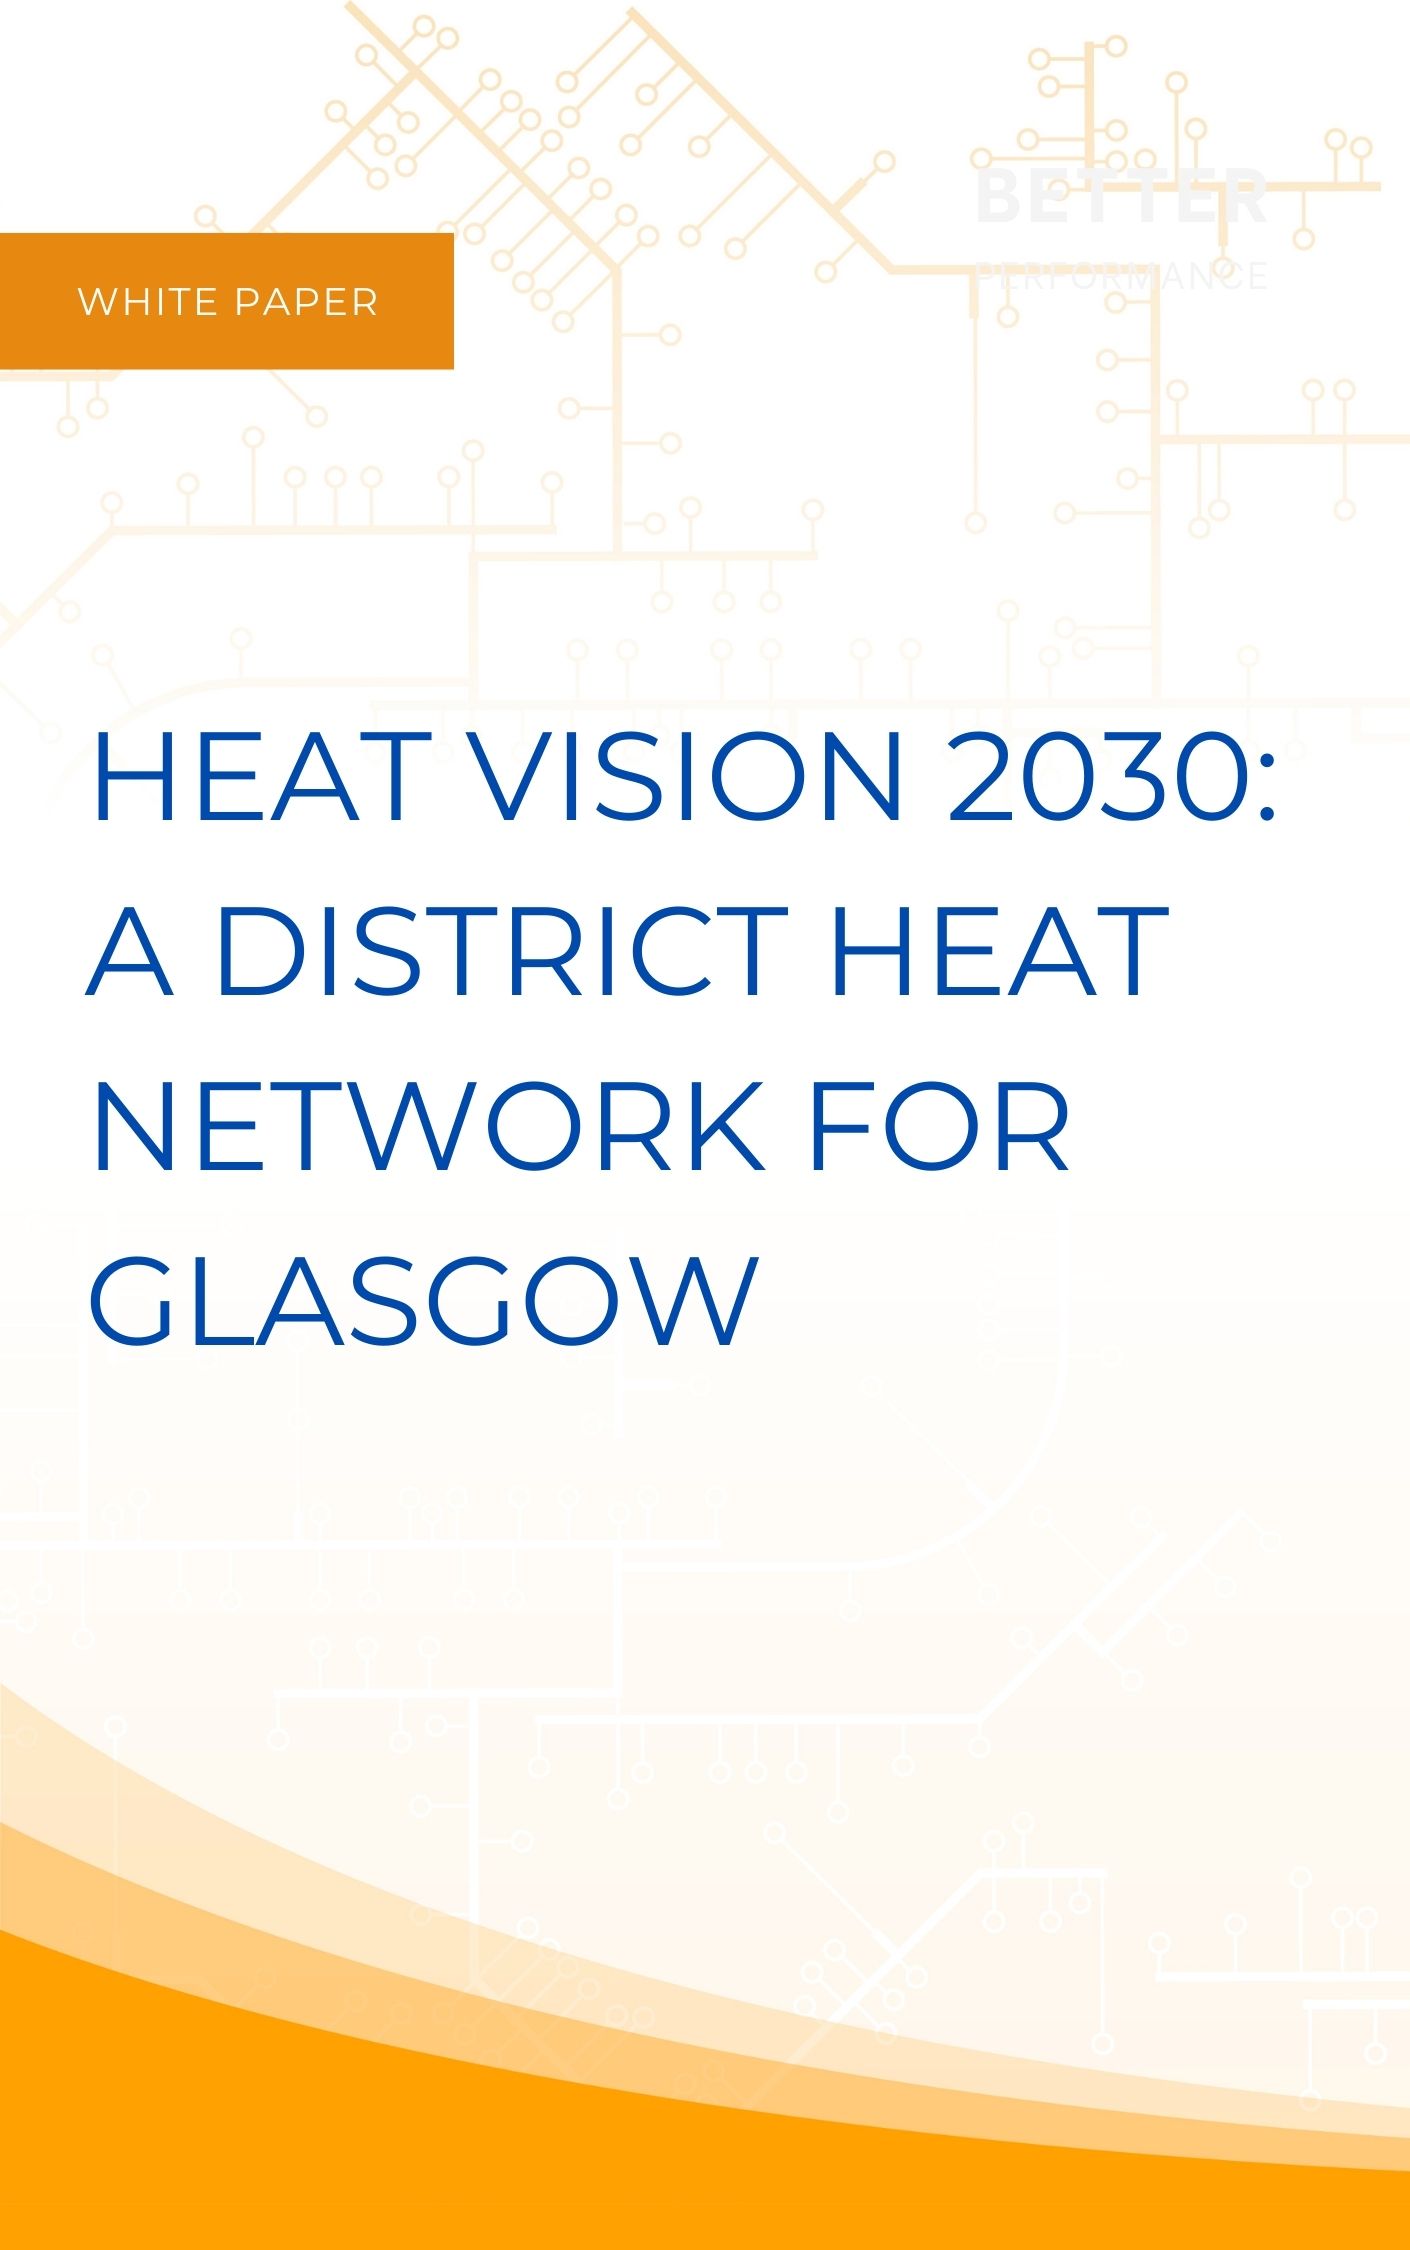 Heat Vision 2030 A District Heat Network for Glasgow